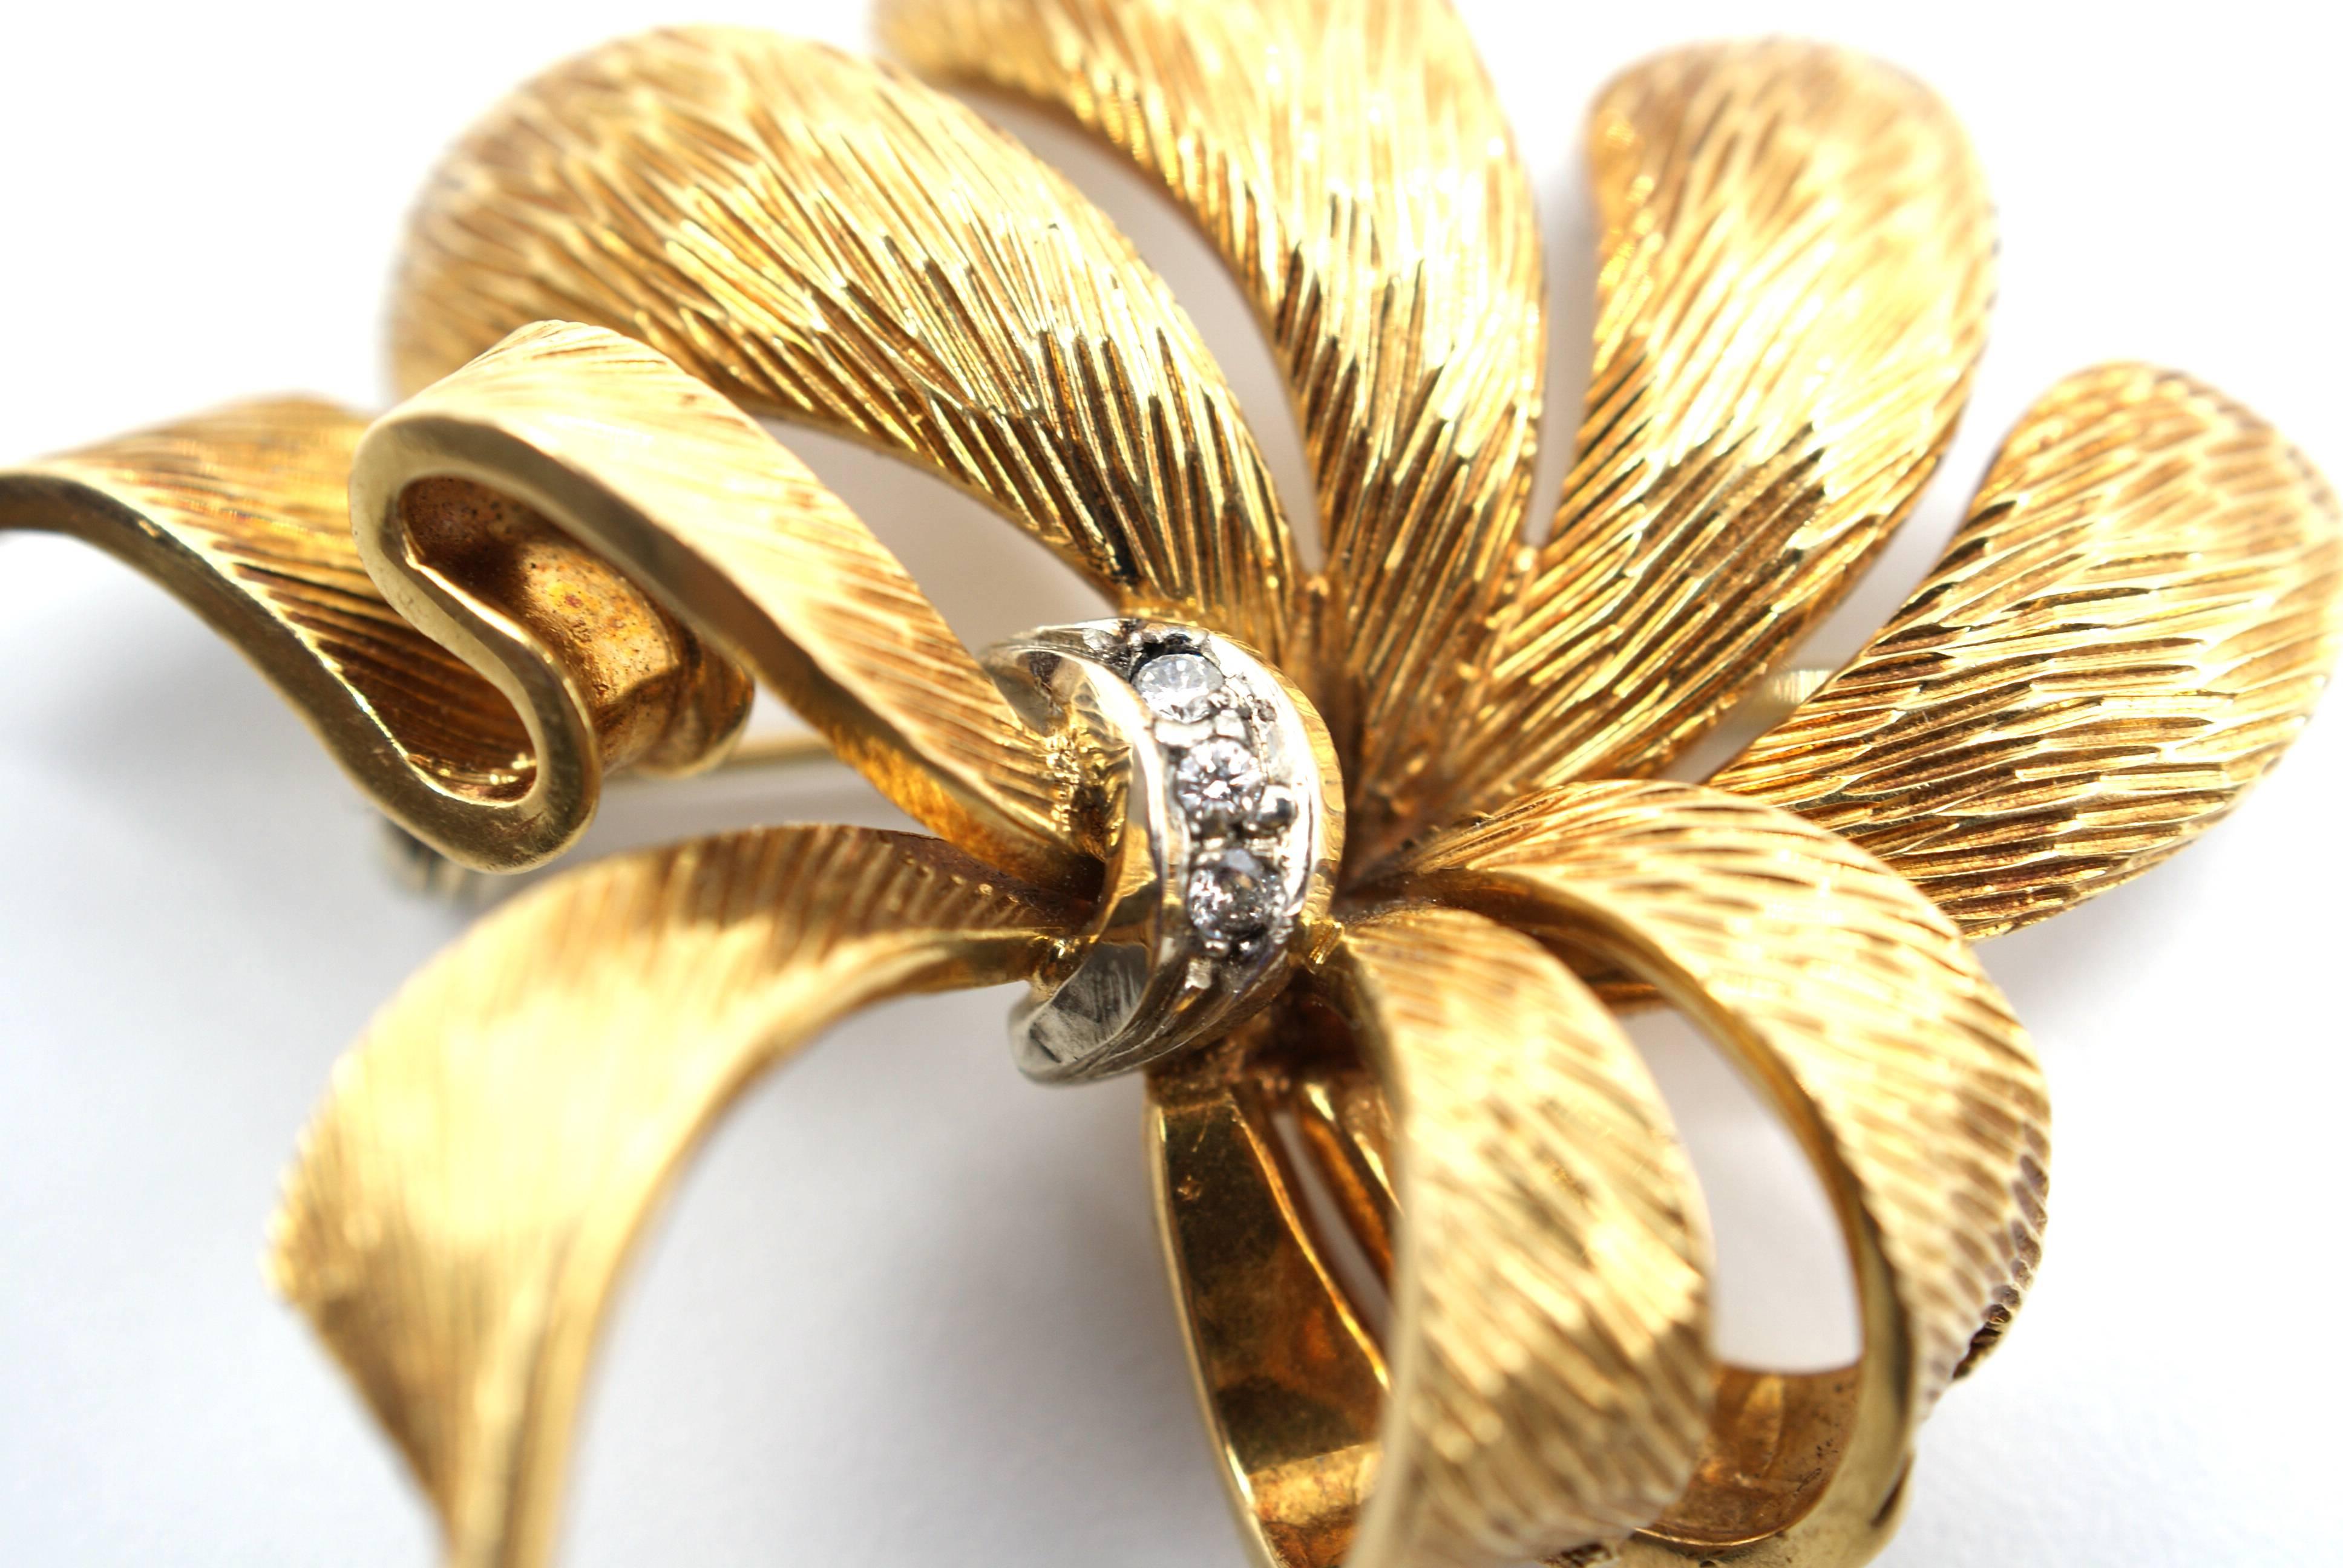 Stylish 1970s brooch handcrafted out 18 karat textured gold, with a floral bow design. The brooch is signed 